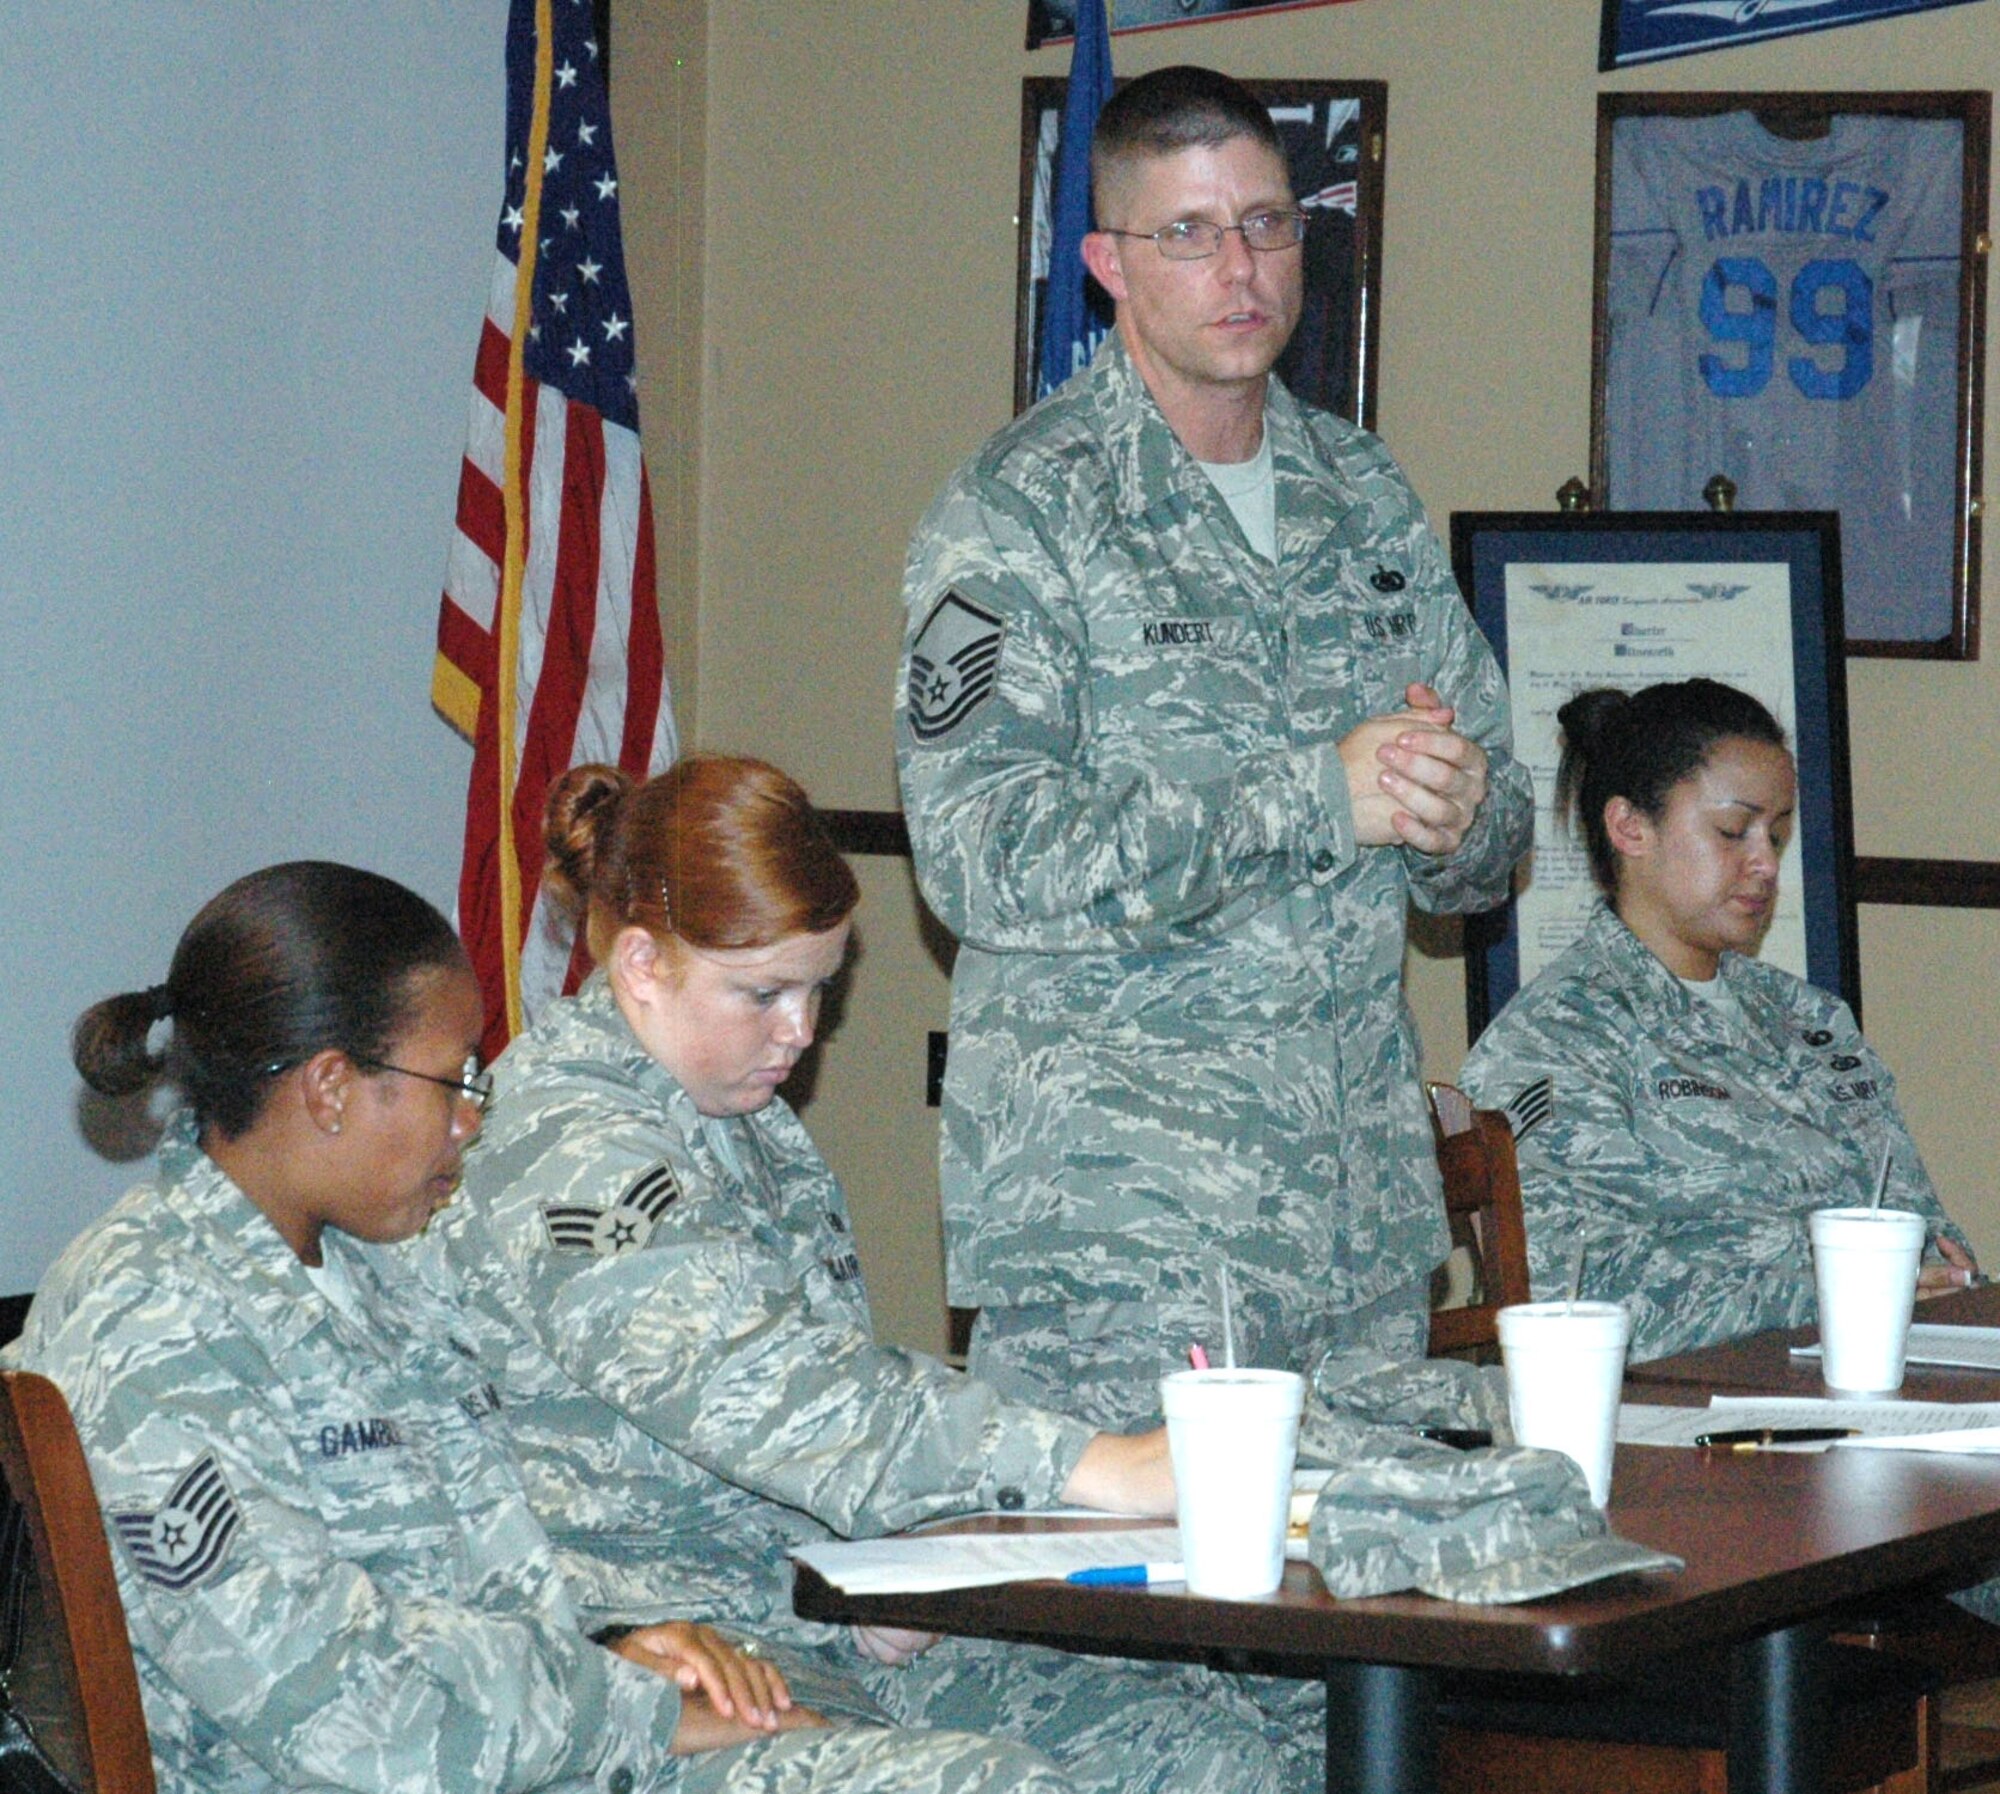 The Air Force Sergeants Association held a meeting July 14 at the Community Activity Center.